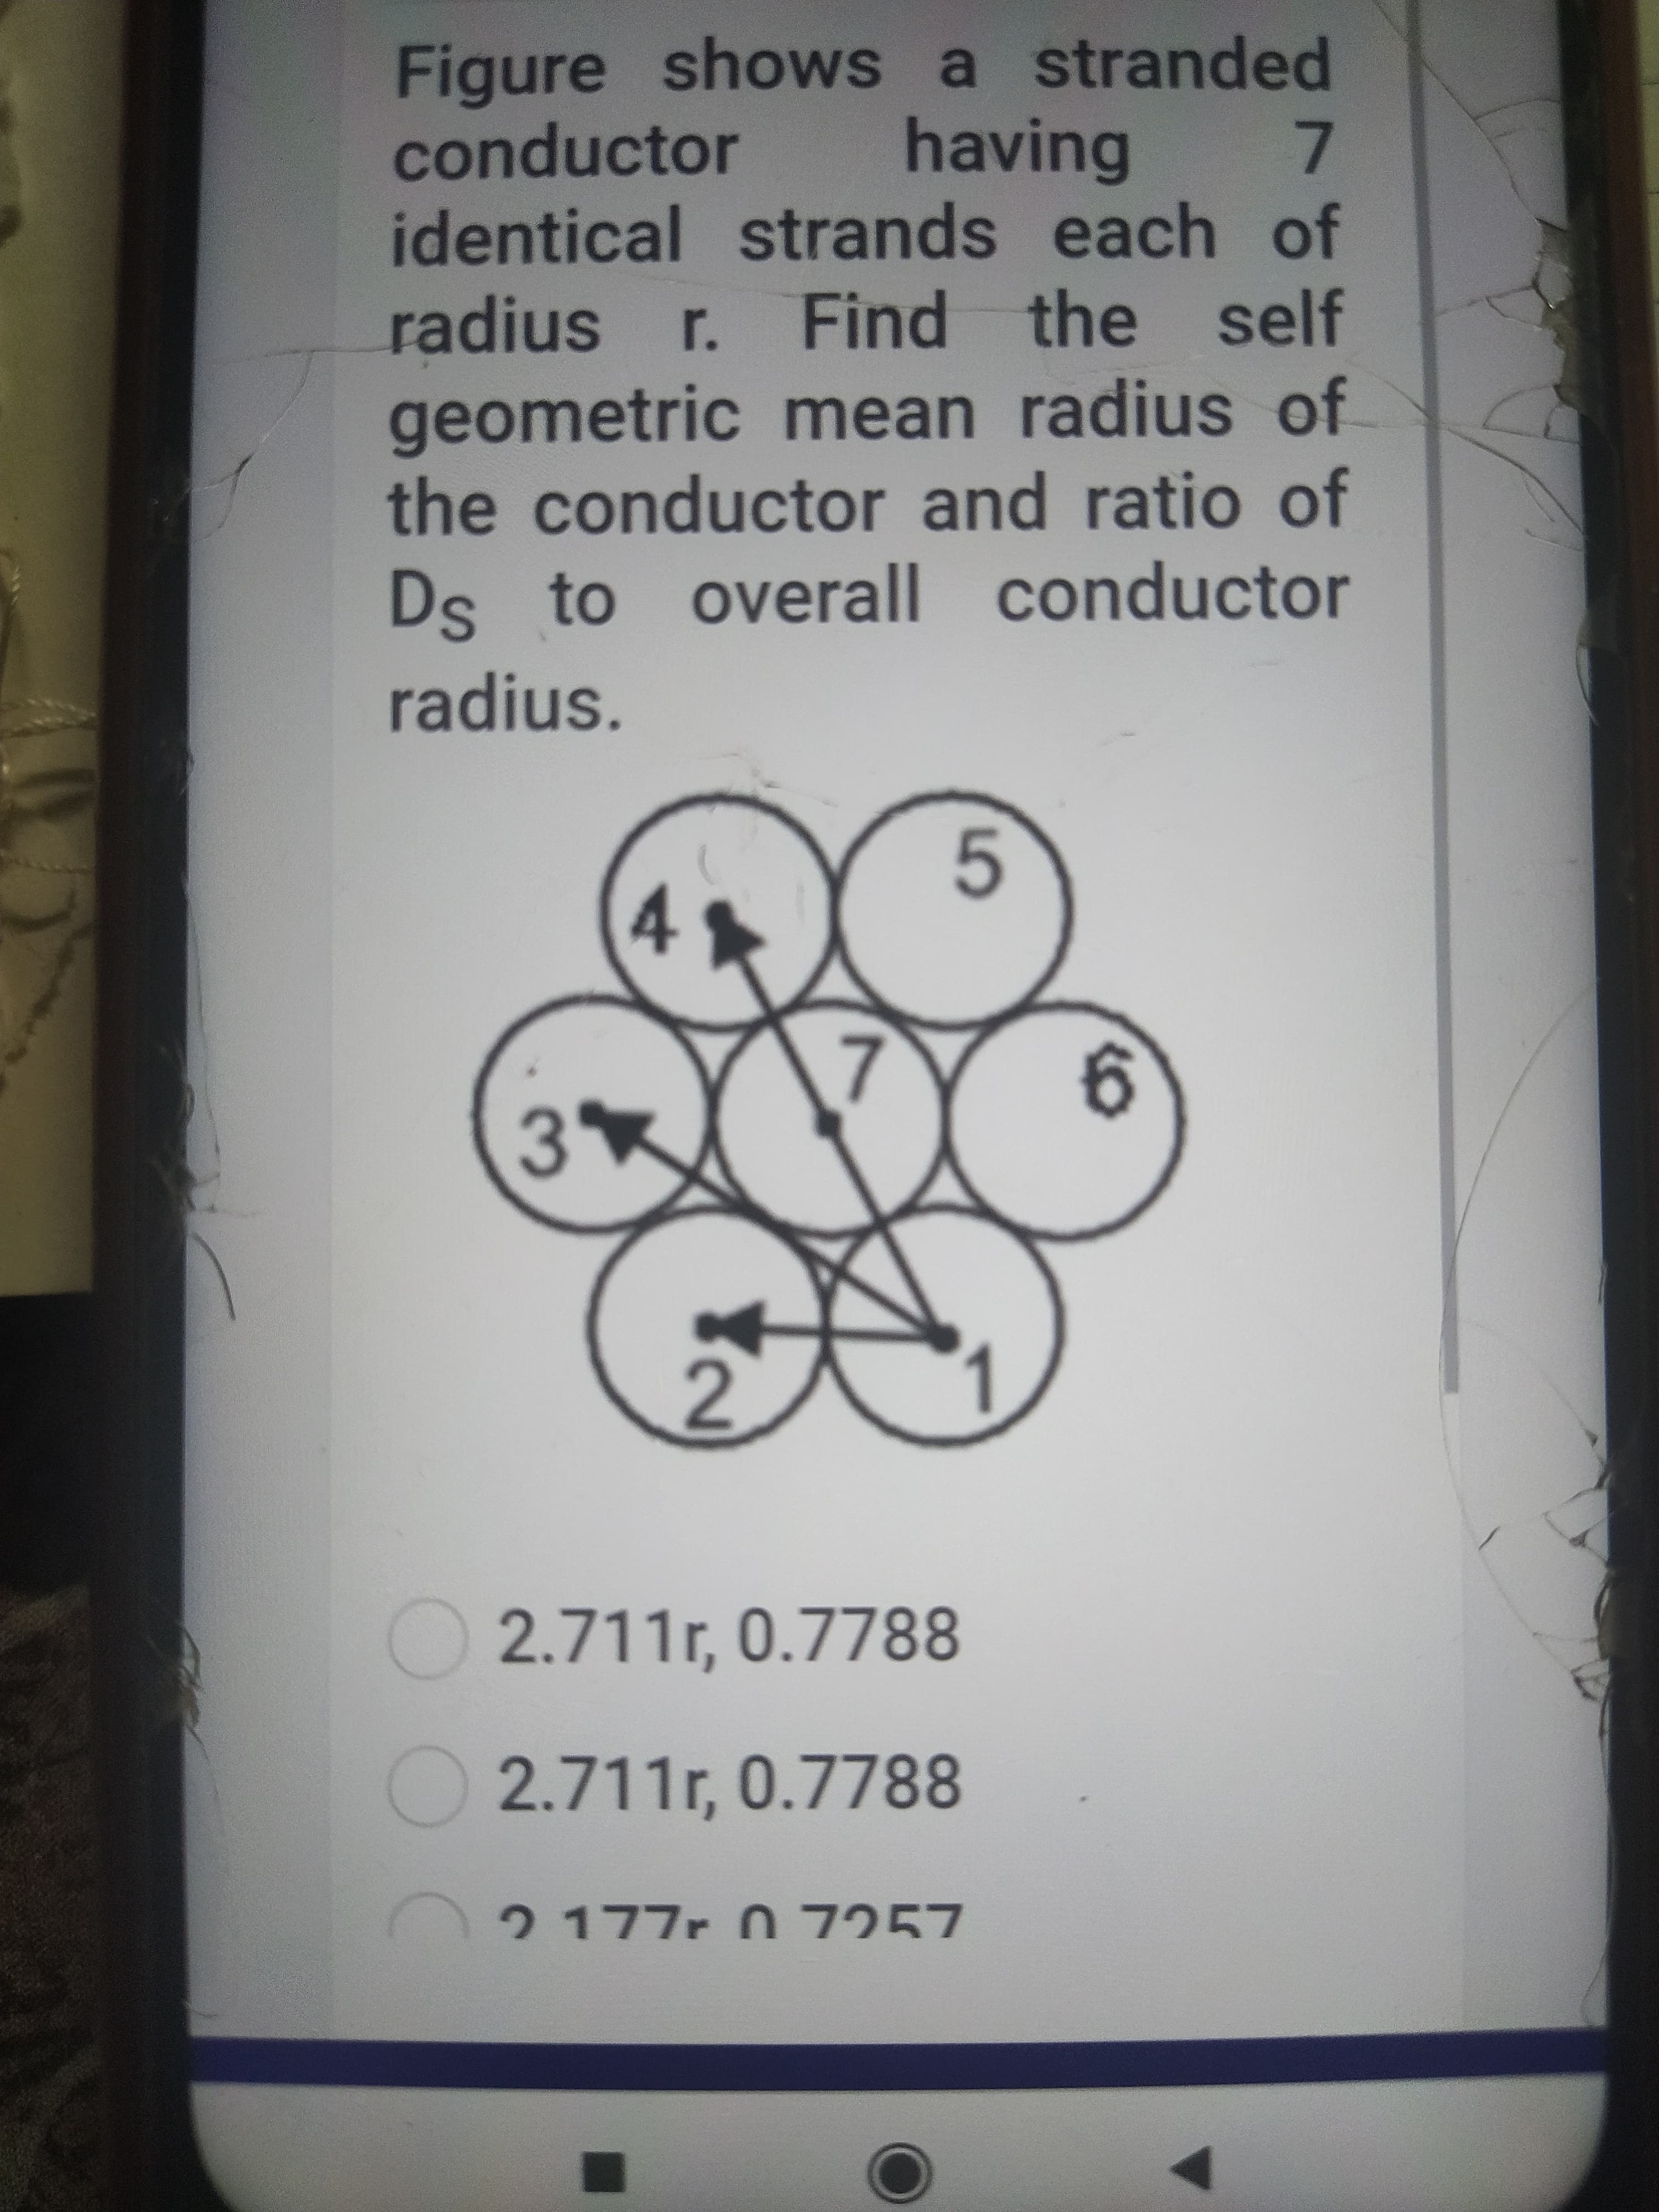 Figure shows a stranded
conductor
identical strands each of
having
7.
radius r. Find the self
geometric mean radius of
the conductor and ratio of
Ds to overall conductor
radius.
5.
3.
2.711r, 0.7788
2.711r, 0.7788
